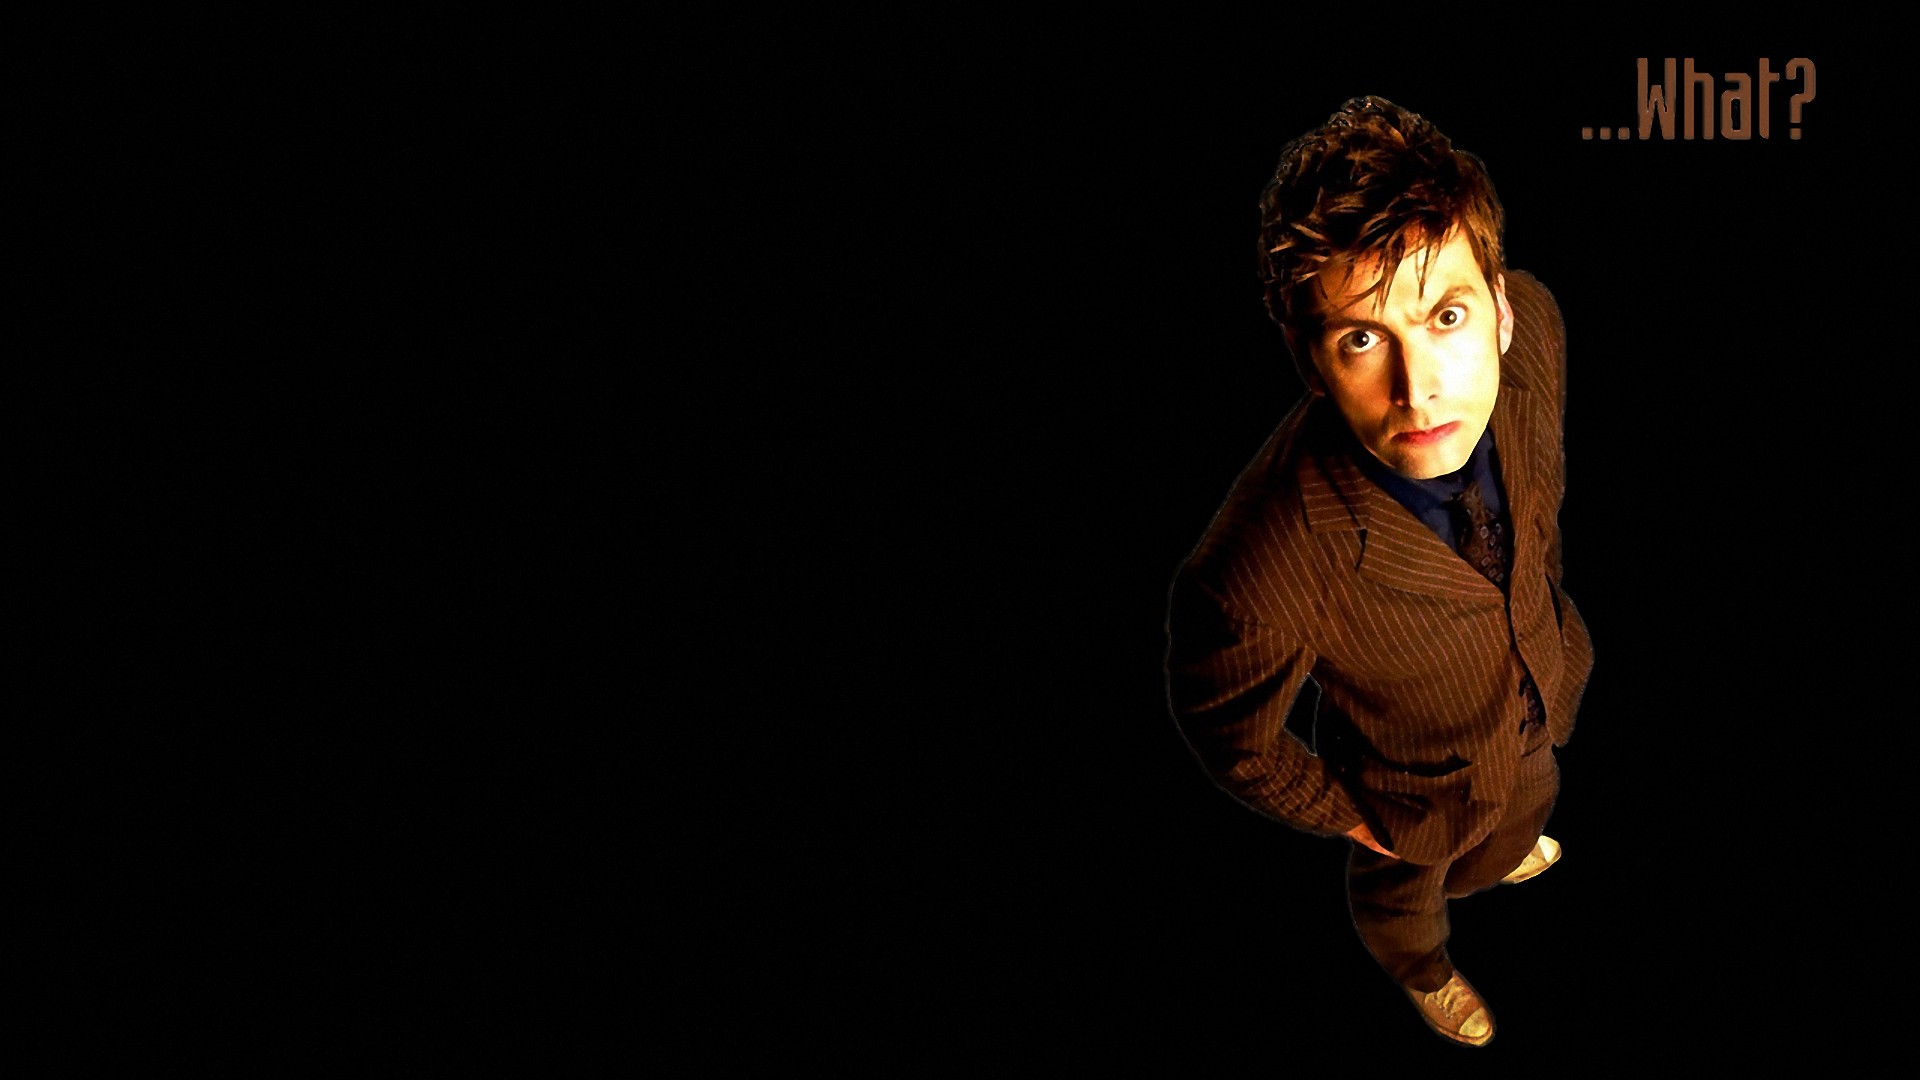 david tennant doctor who black background tenth doctor Wallpaper